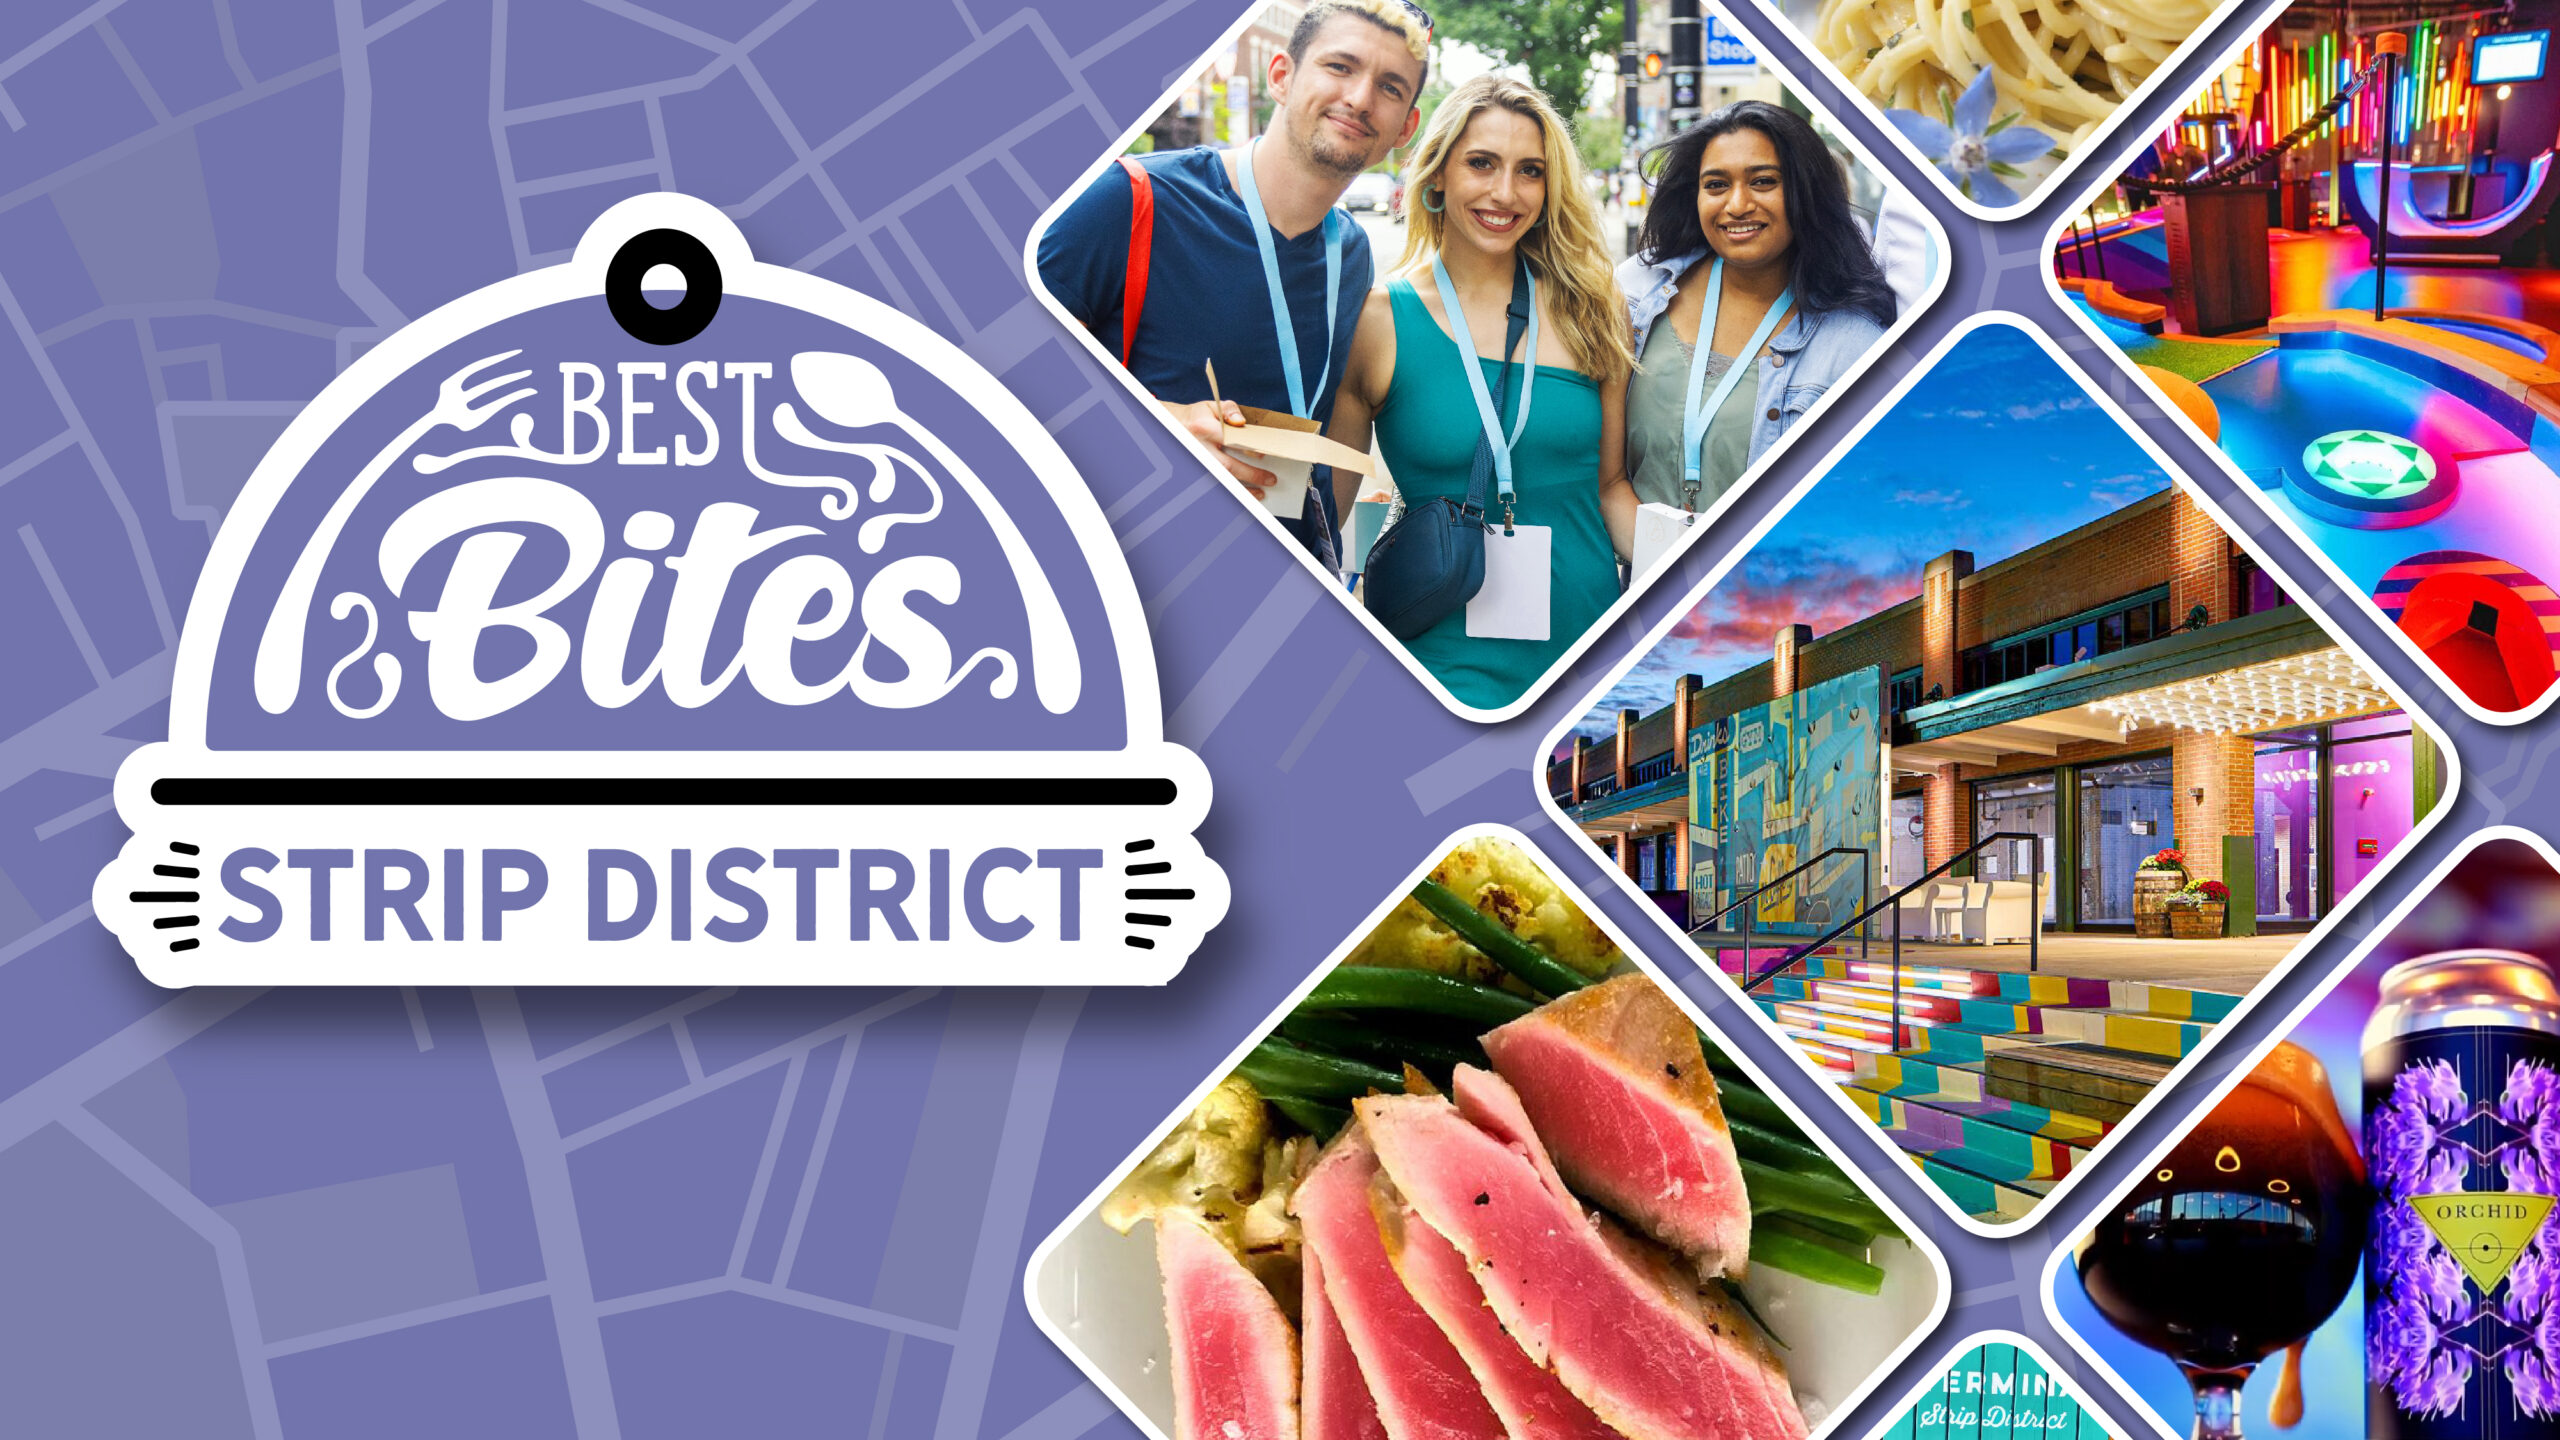 The Best Bites Strip District graphic. The background is a periwinkle map, with the Best Bites Strip District logo and photos of the Terminal, food, and people overlaid on top.